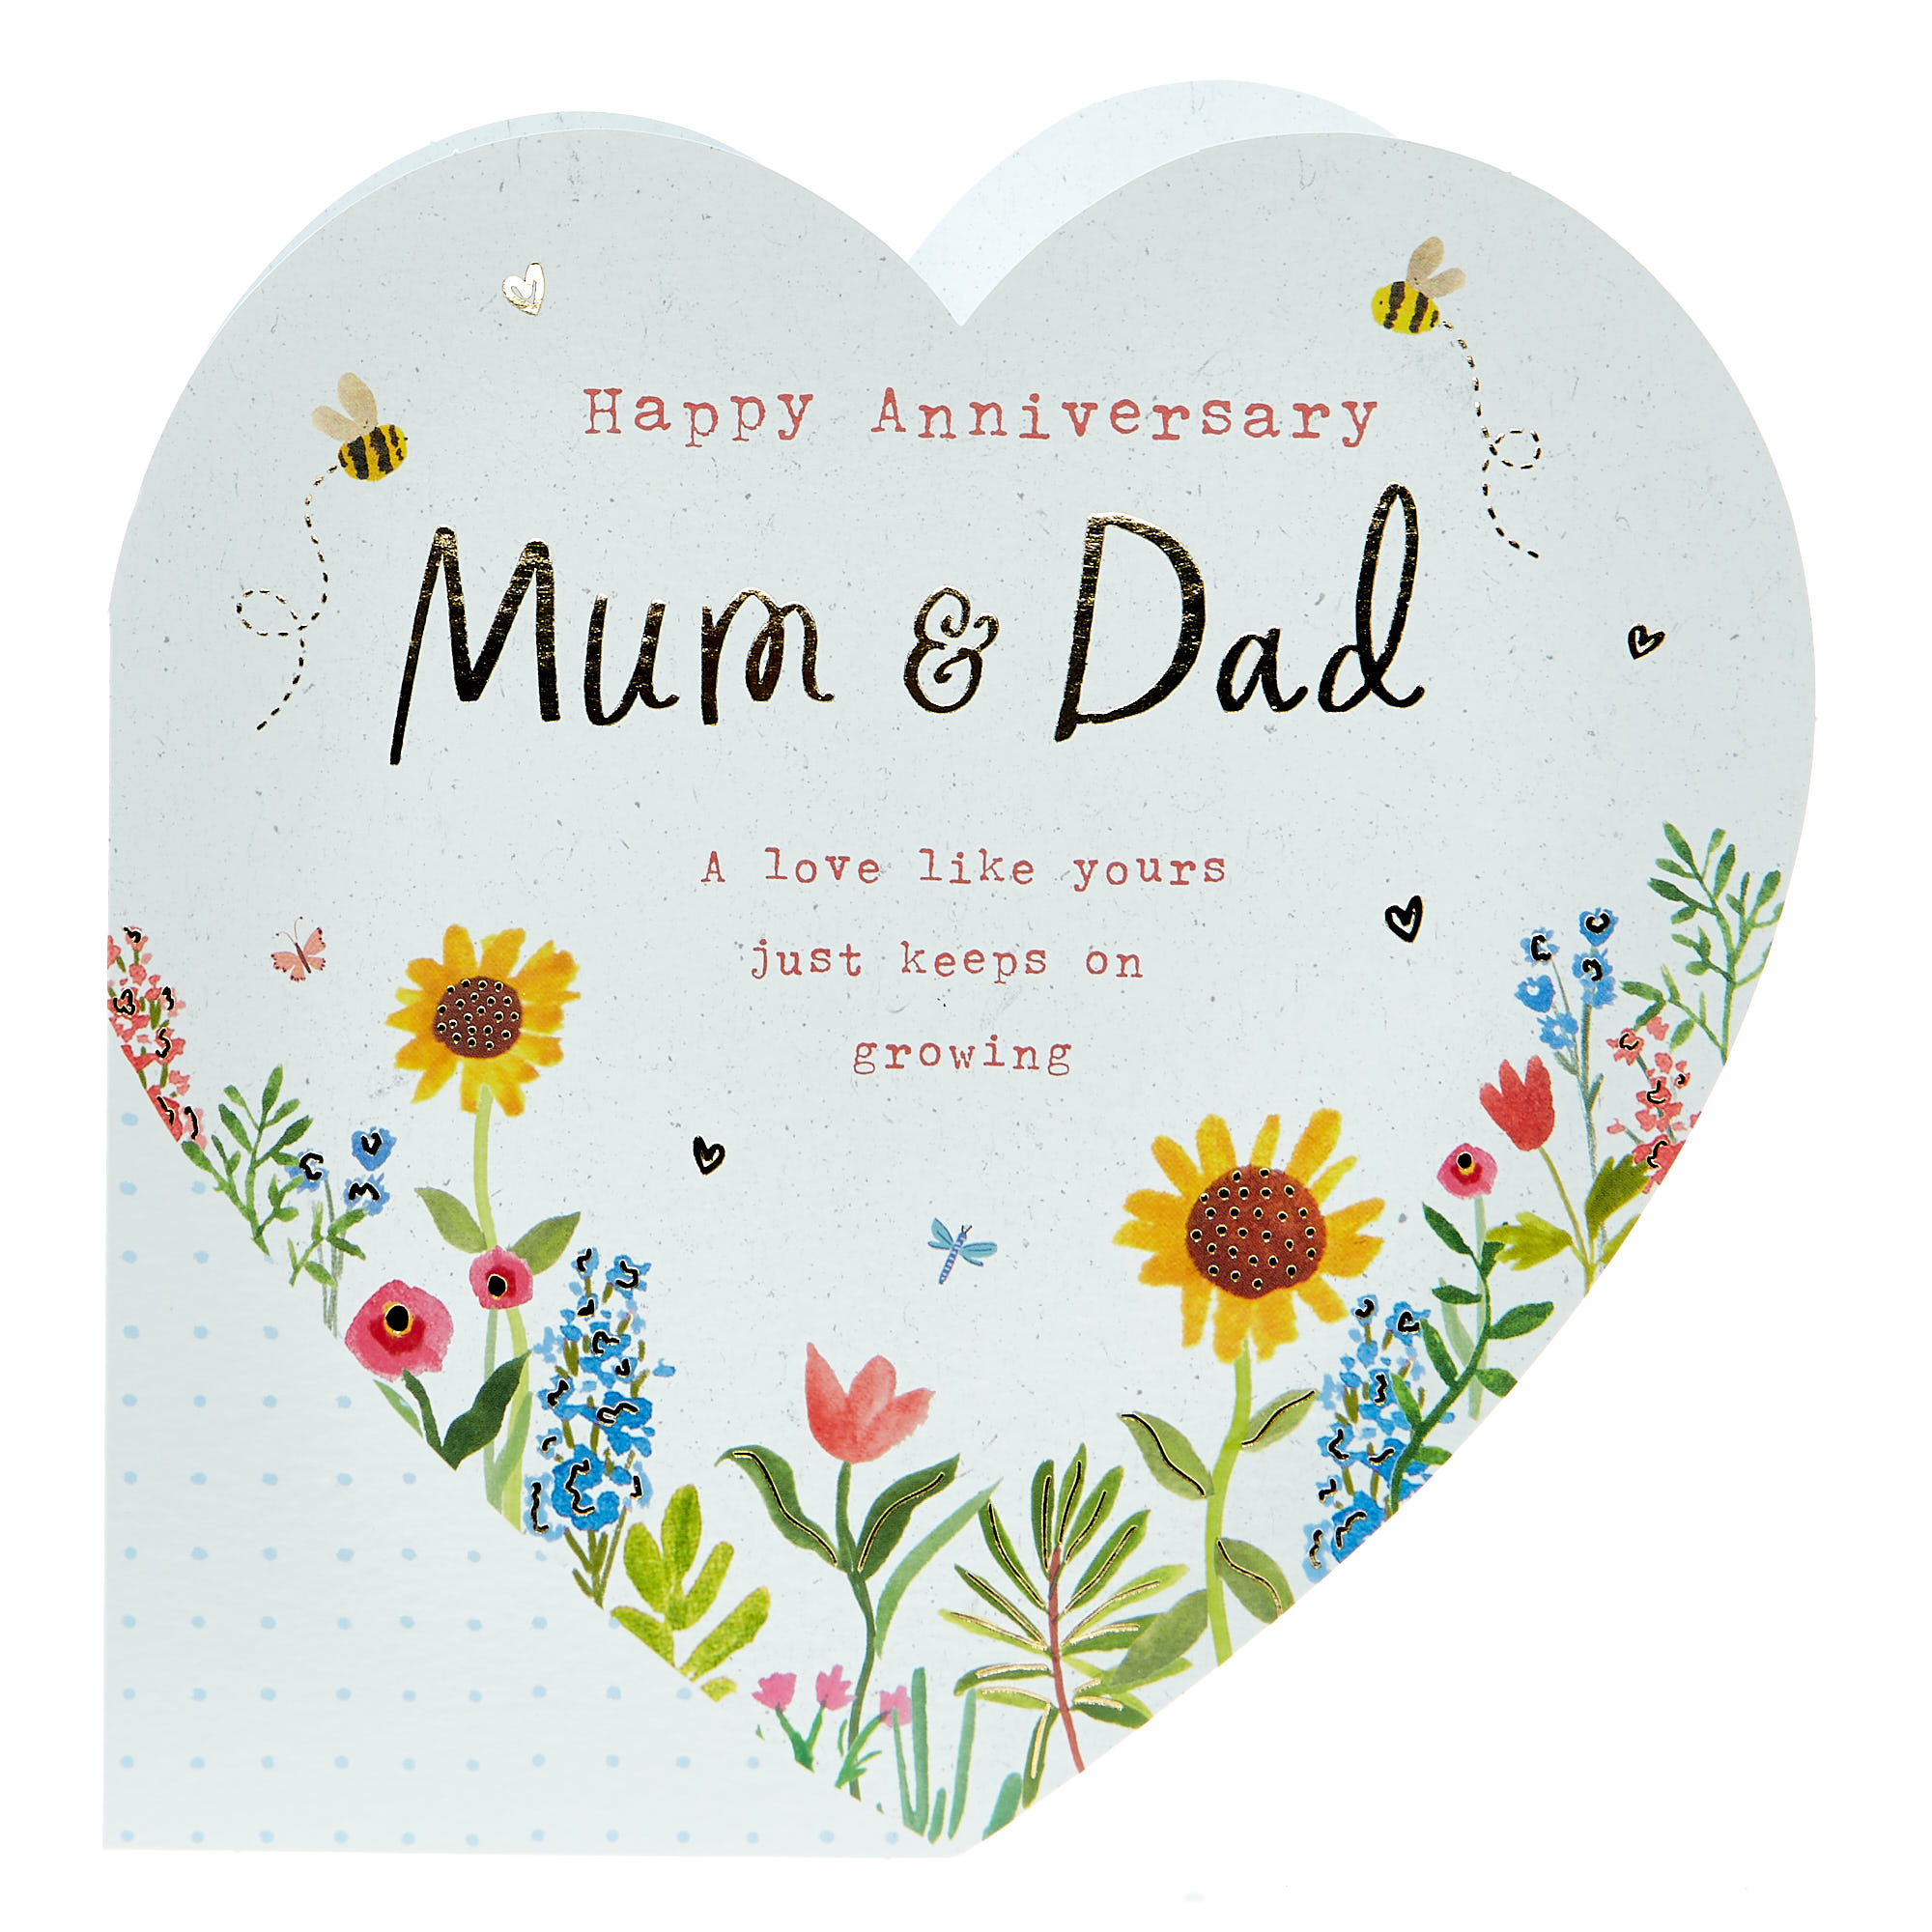 Anniversary Card - Mum & Dad A Love Like Yours...